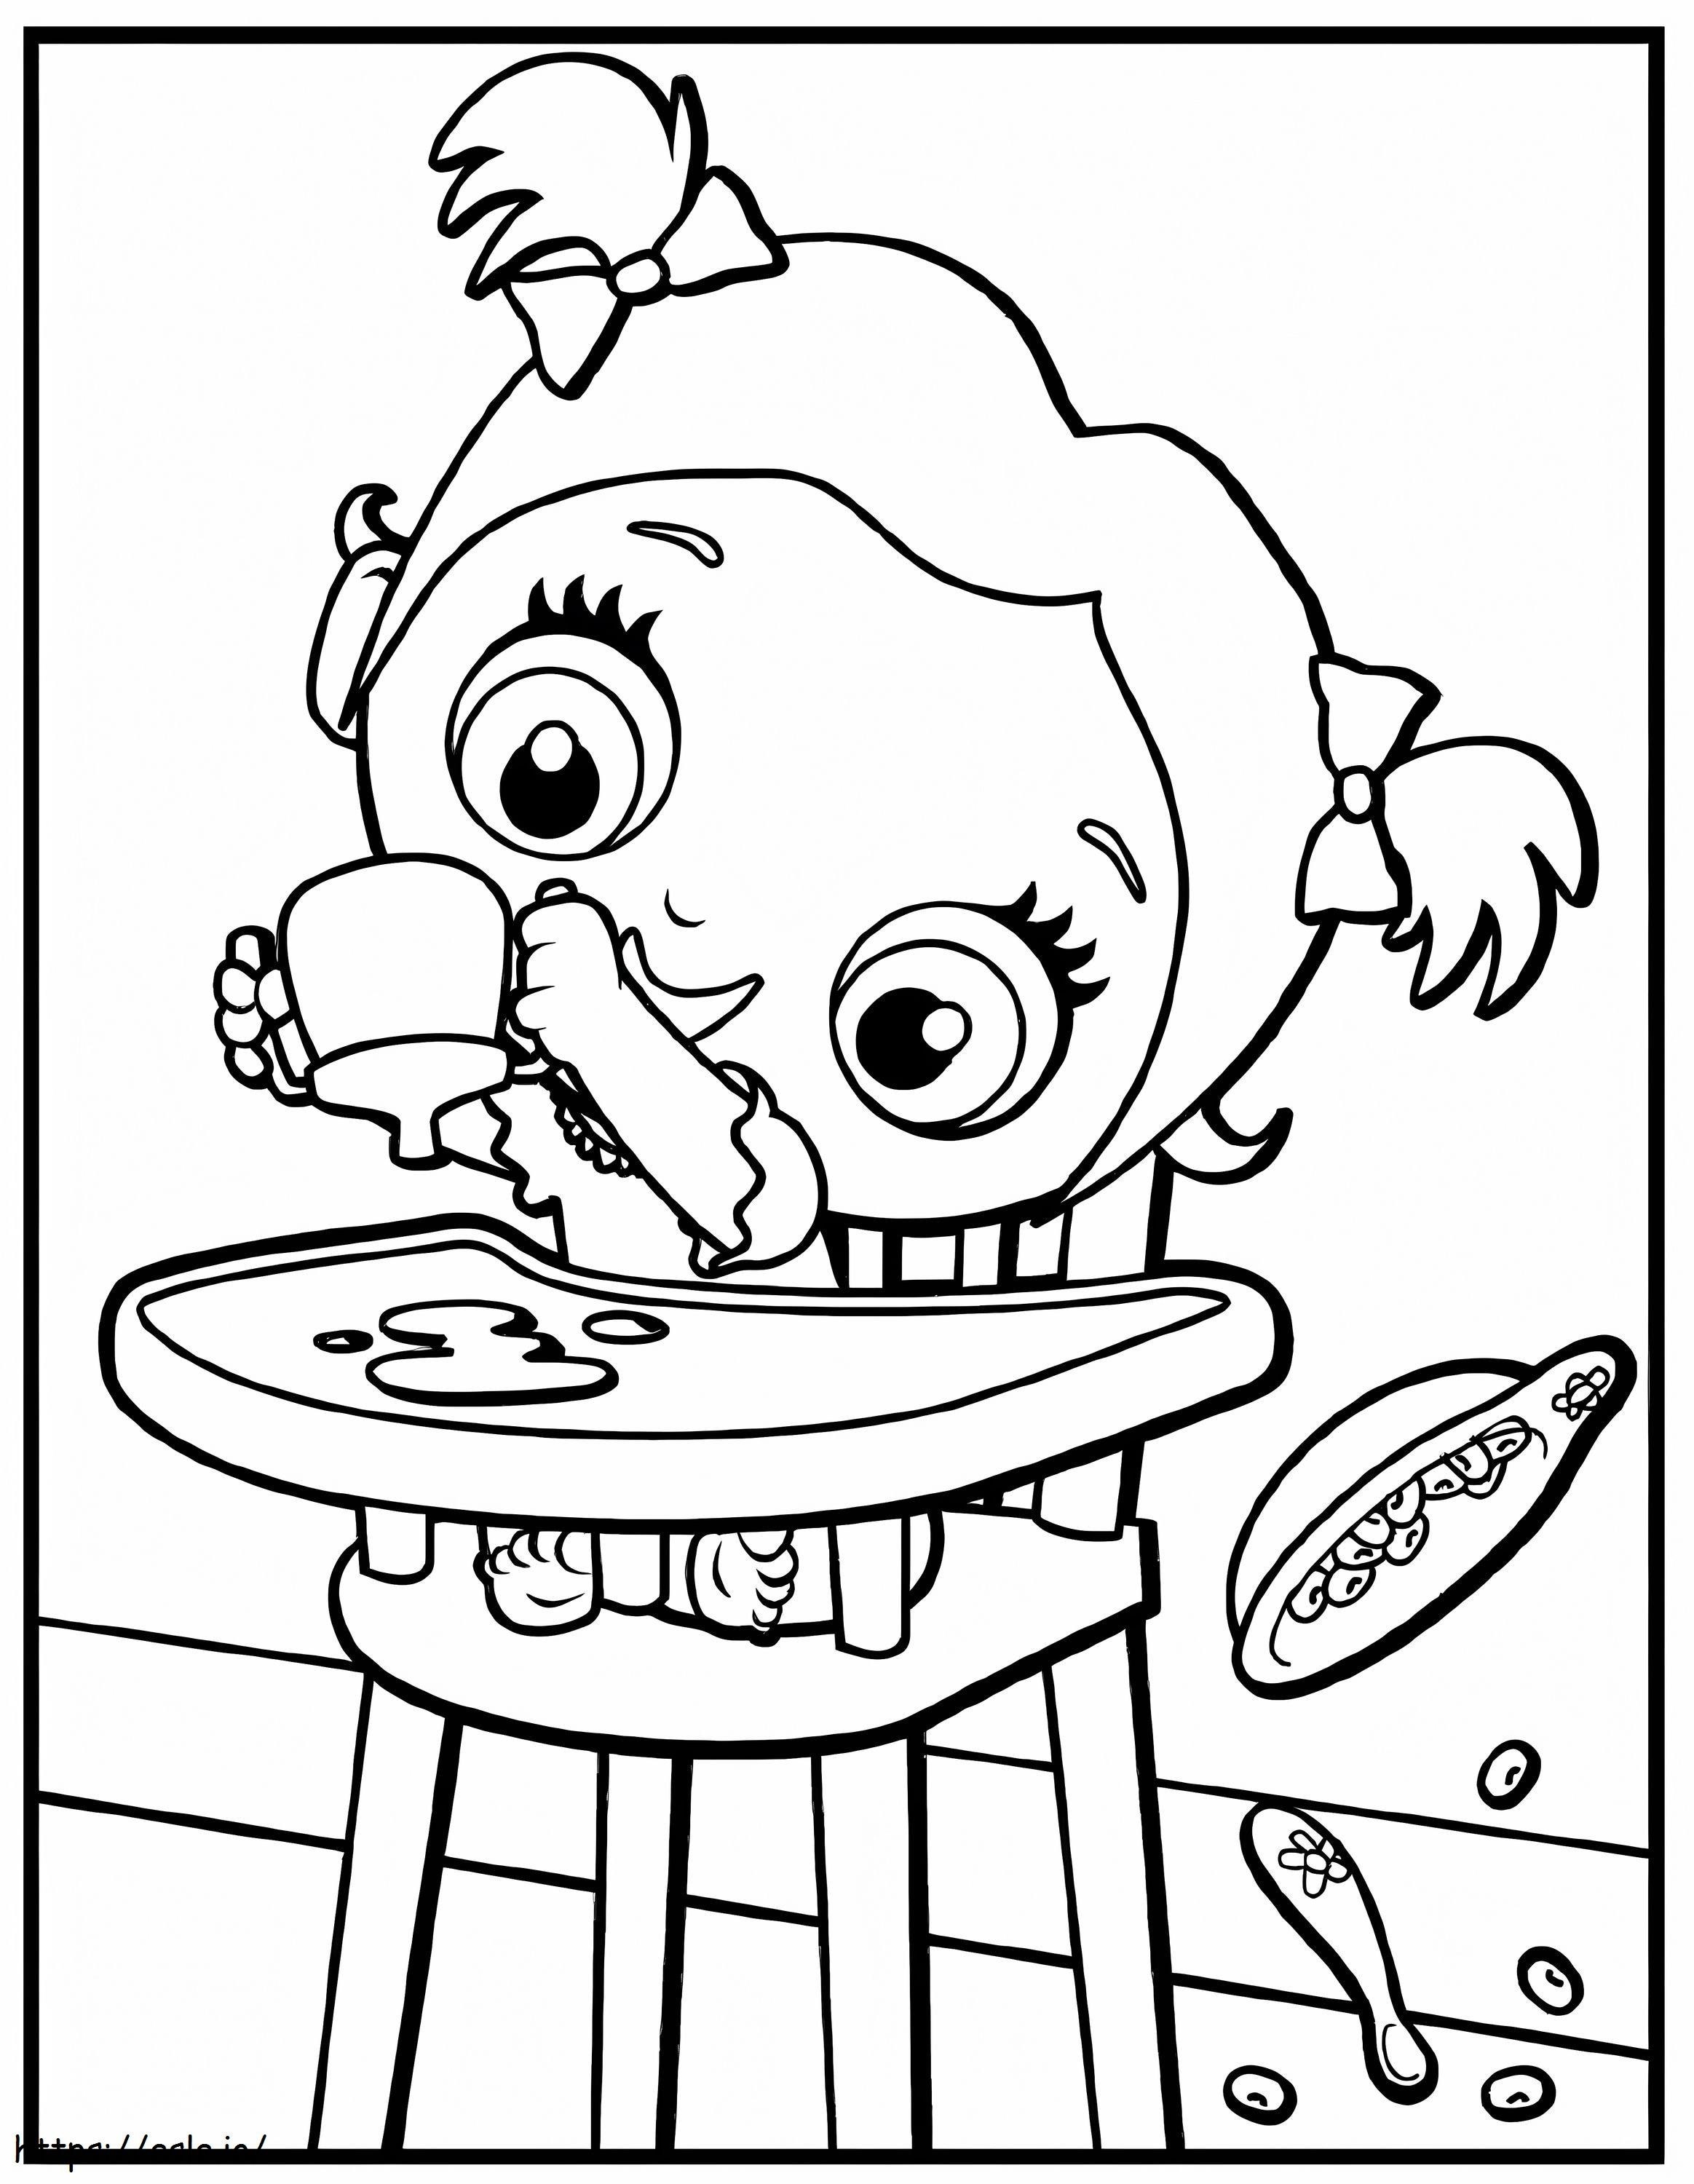 Adorable Baby Alive coloring page